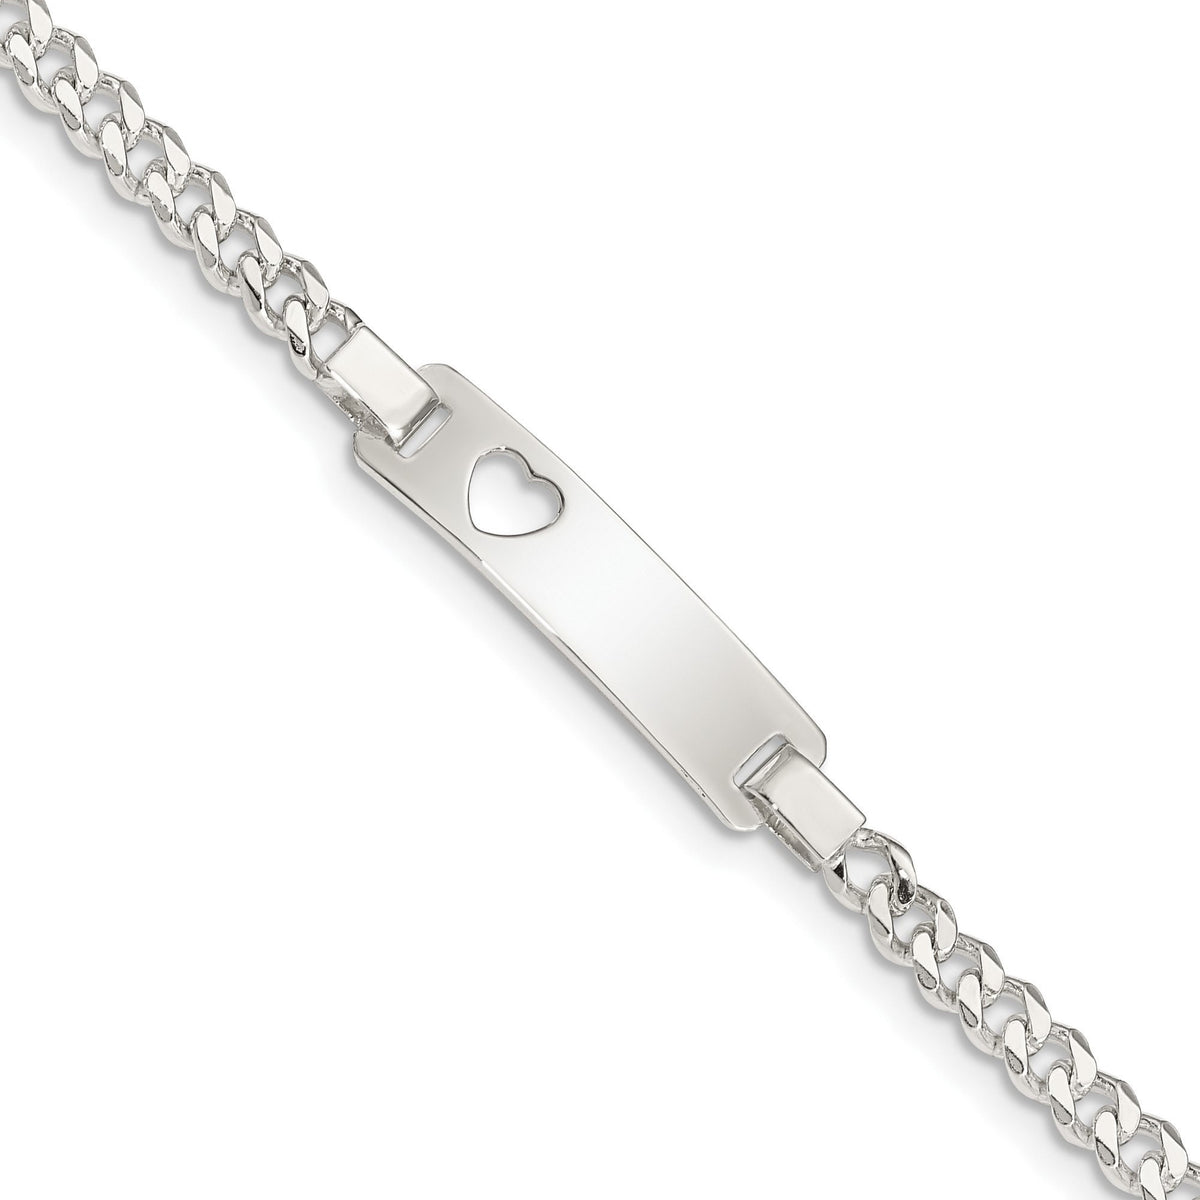 Children's Sterling Silver Personalized ID Cuban Bracelet - 5.5 inches & 6 inches  ENGRAVING  6 months -7 Years Old - Gift Box Included